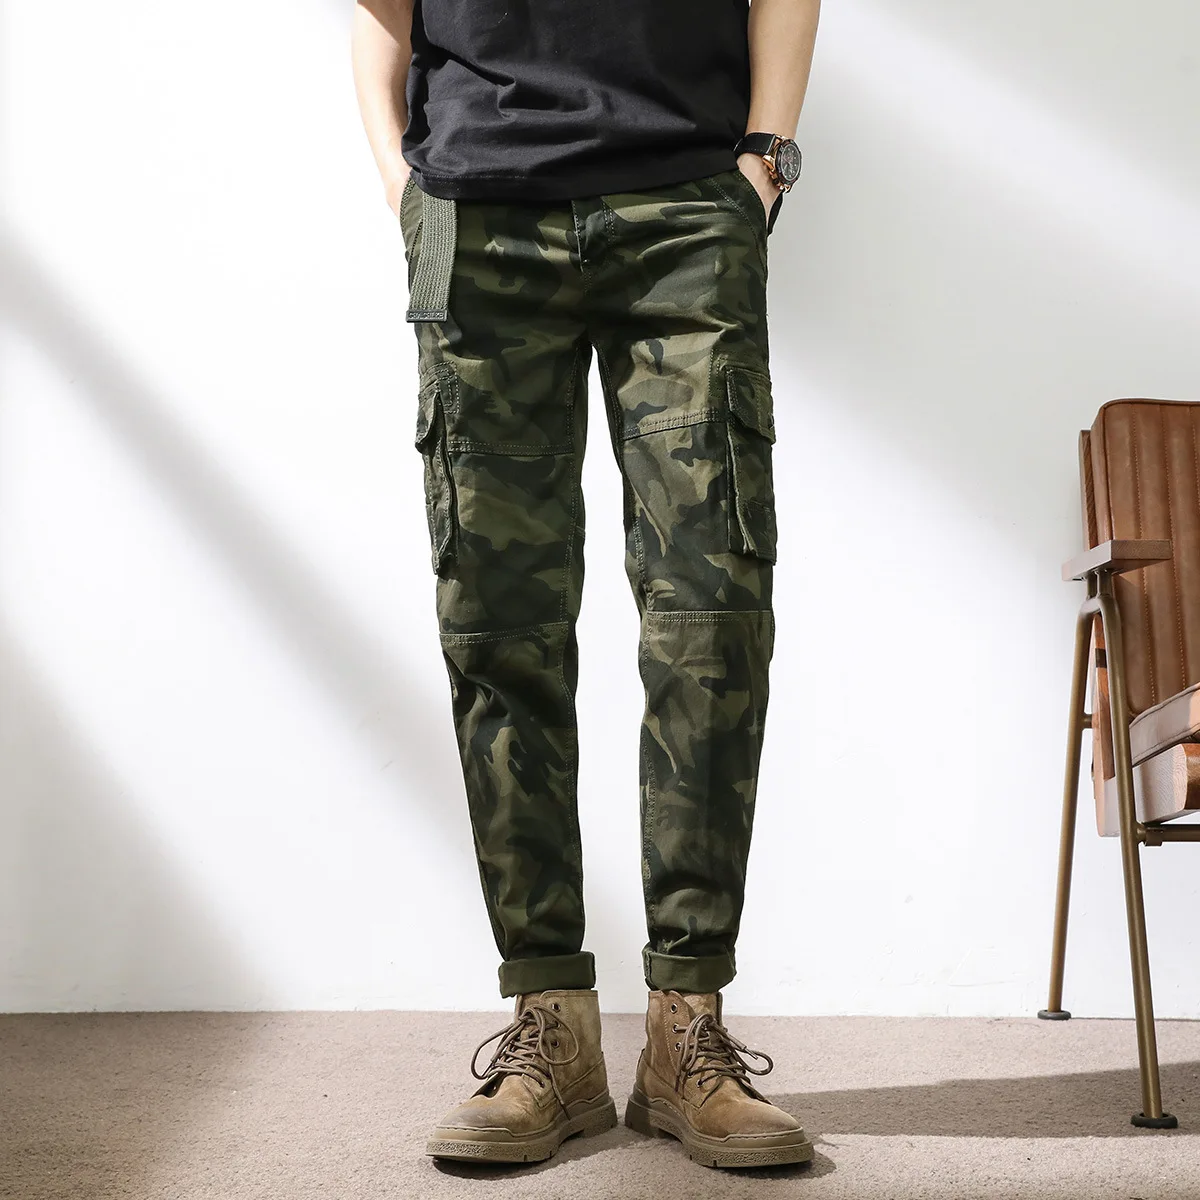 Elmsk Men's Spring New Outdoor Sportswear Camo Pants Hong Kong Style Fashion Loose Straight Sleeve Multi Pocket Large Military P